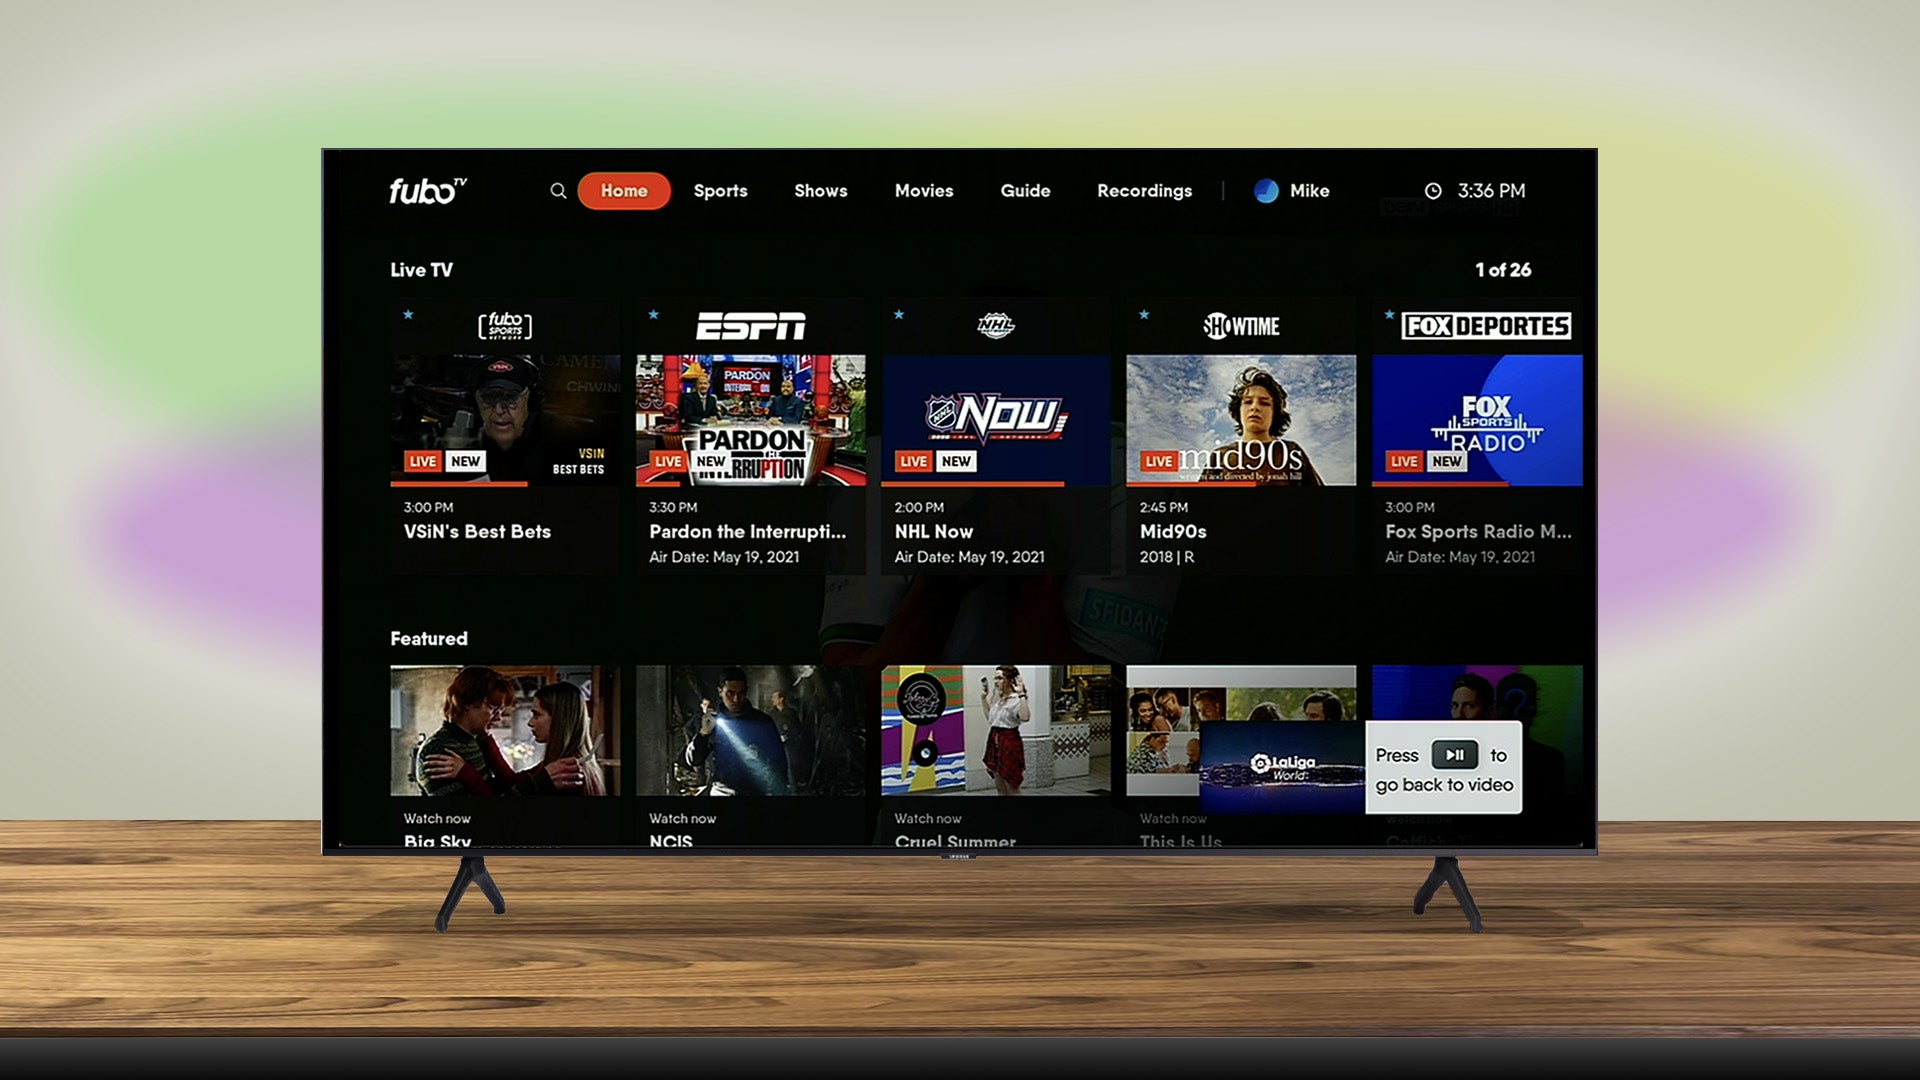 How To Watch Fubo On Samsung Smart TV